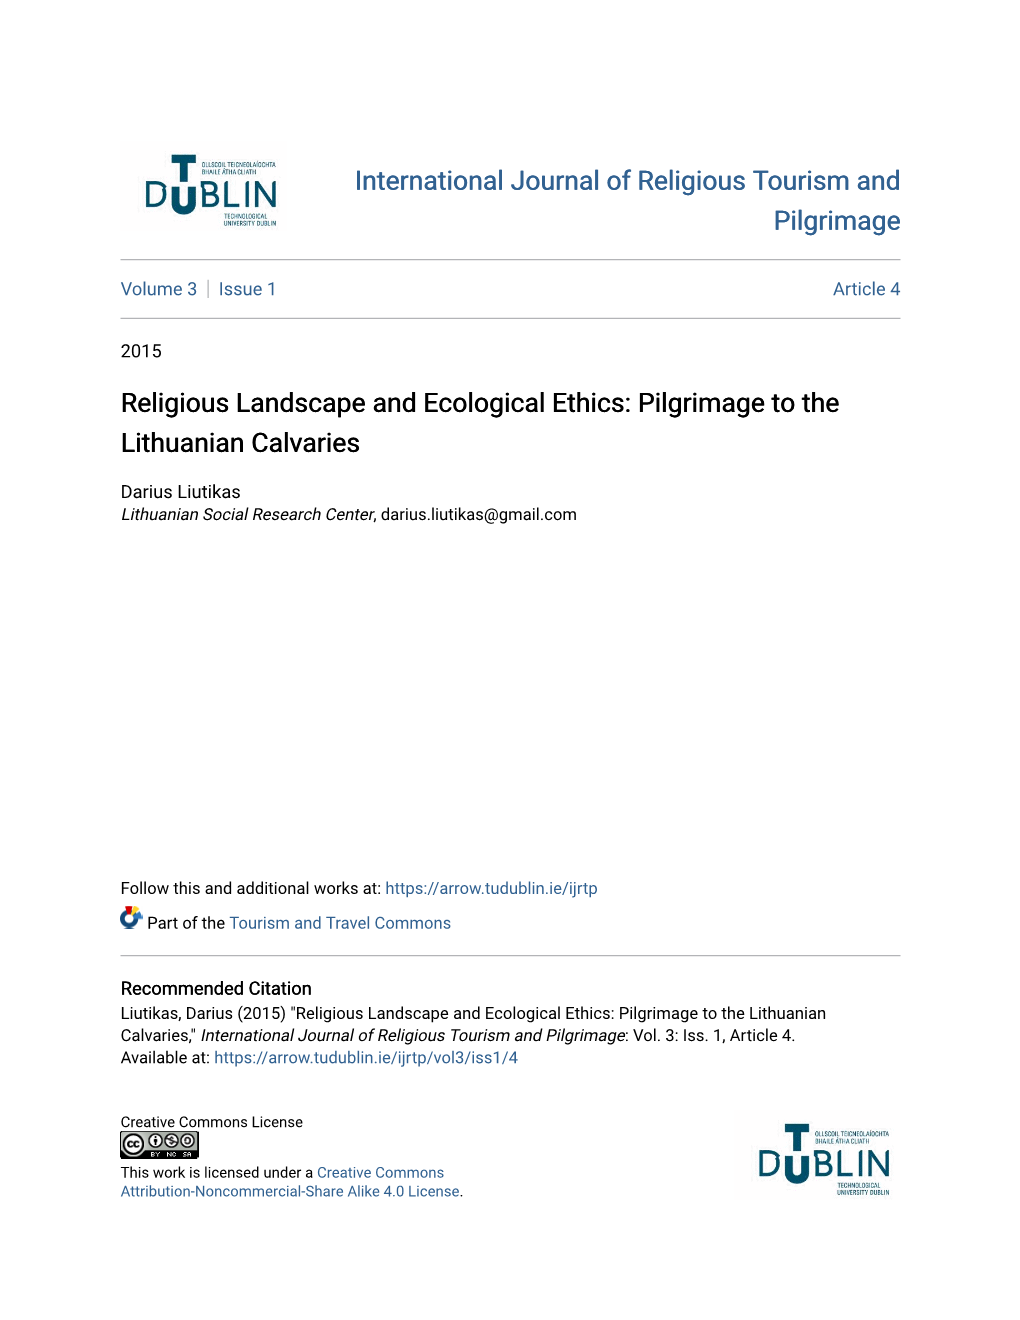 Religious Landscape and Ecological Ethics: Pilgrimage to the Lithuanian Calvaries